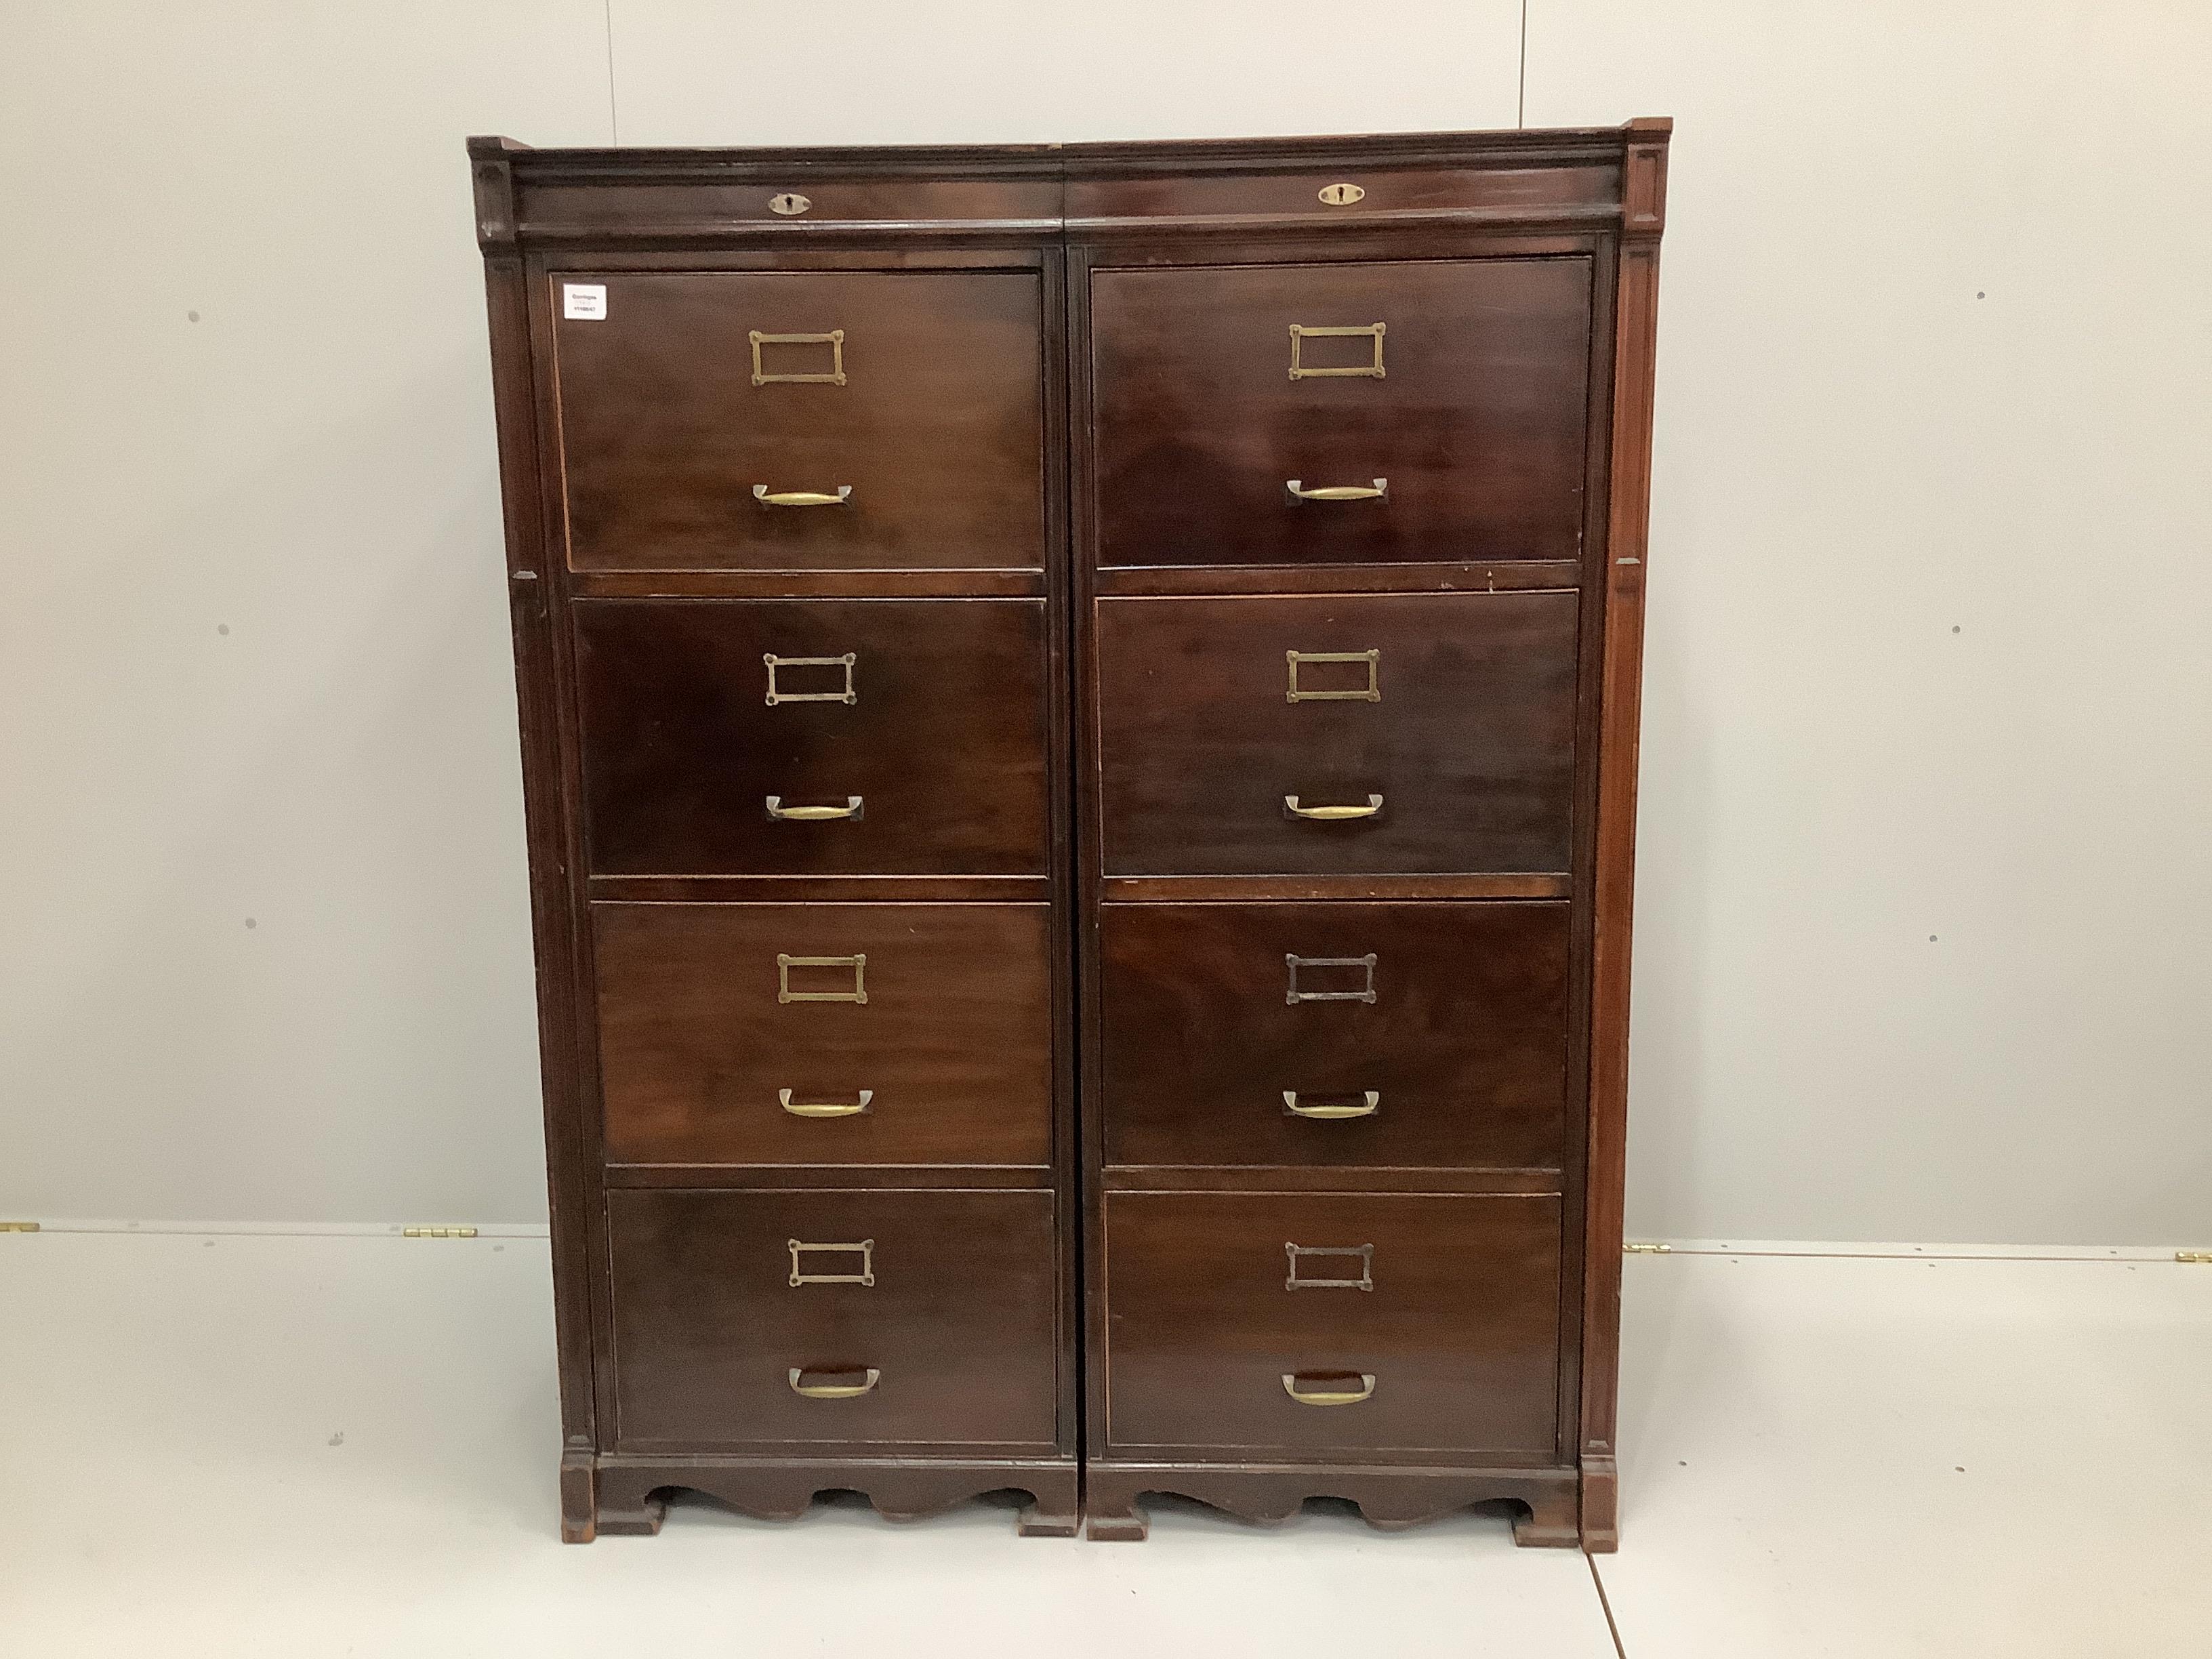 An Edwardian mahogany eight drawer double bank filing cabinet, combined width 113cm, depth 75cm, height 146cm. Originally in the ownership of Edwin Waterhouse (1841-1917), co-founder of Price Waterhouse (now Price Waterh